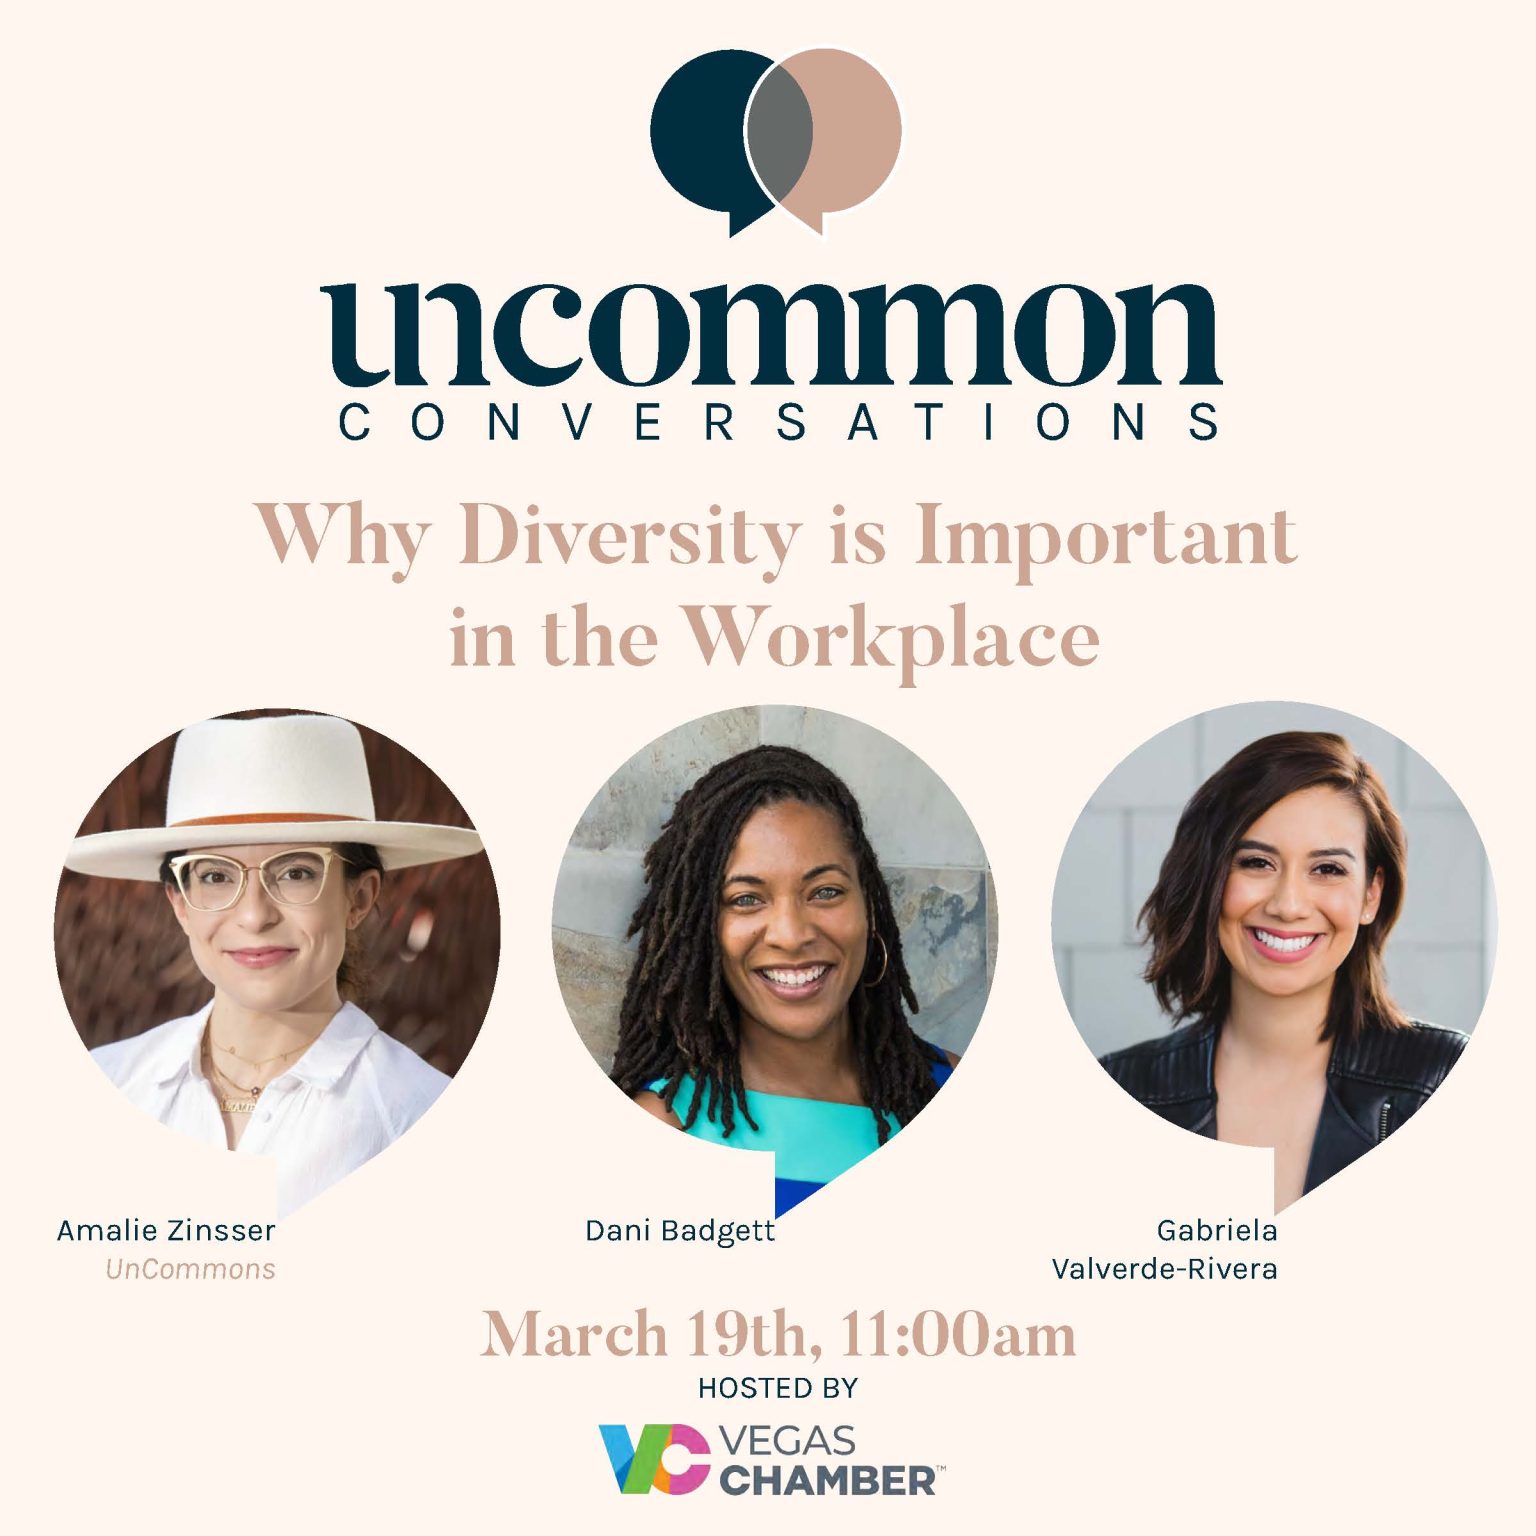 “Uncommon Conversations” Series Holds First Event Focusing on Diversity in the Workplace